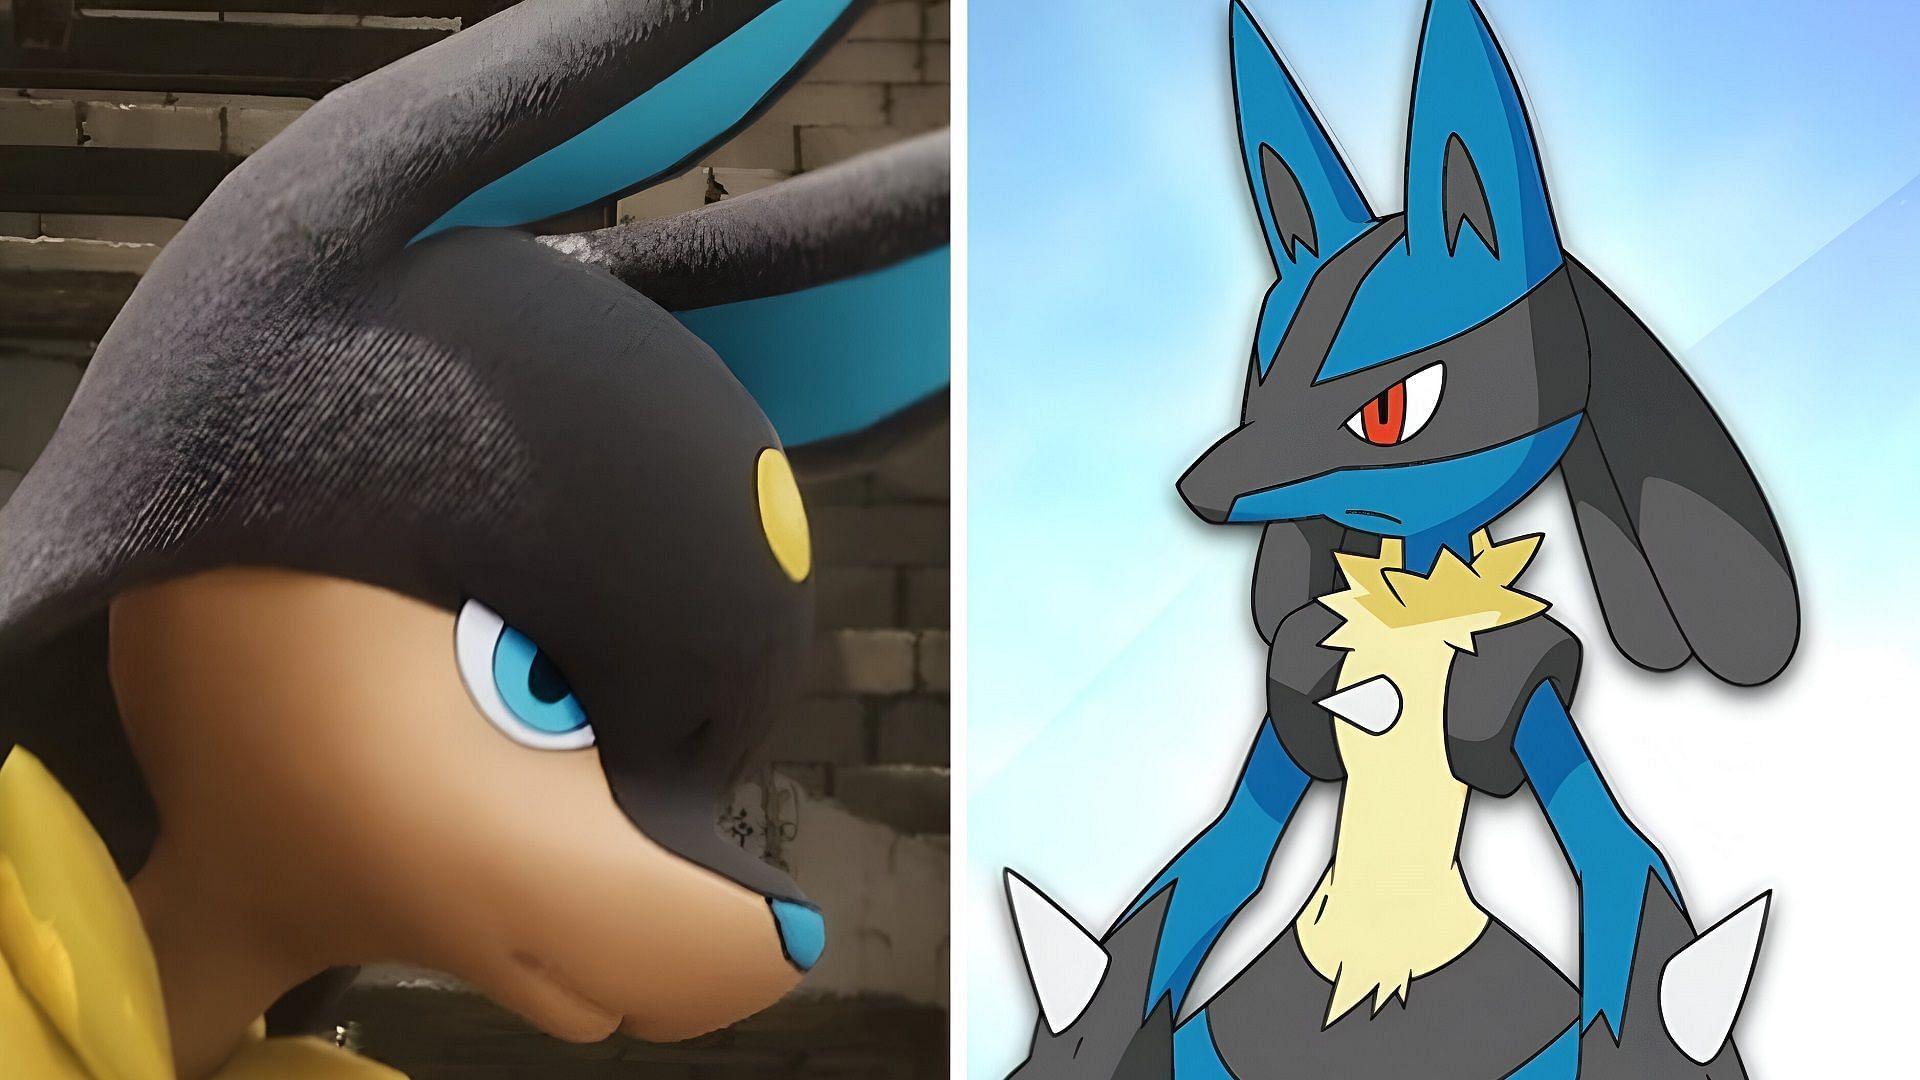 Anubis and Lucario from Palworld and Pokemon, respectively.